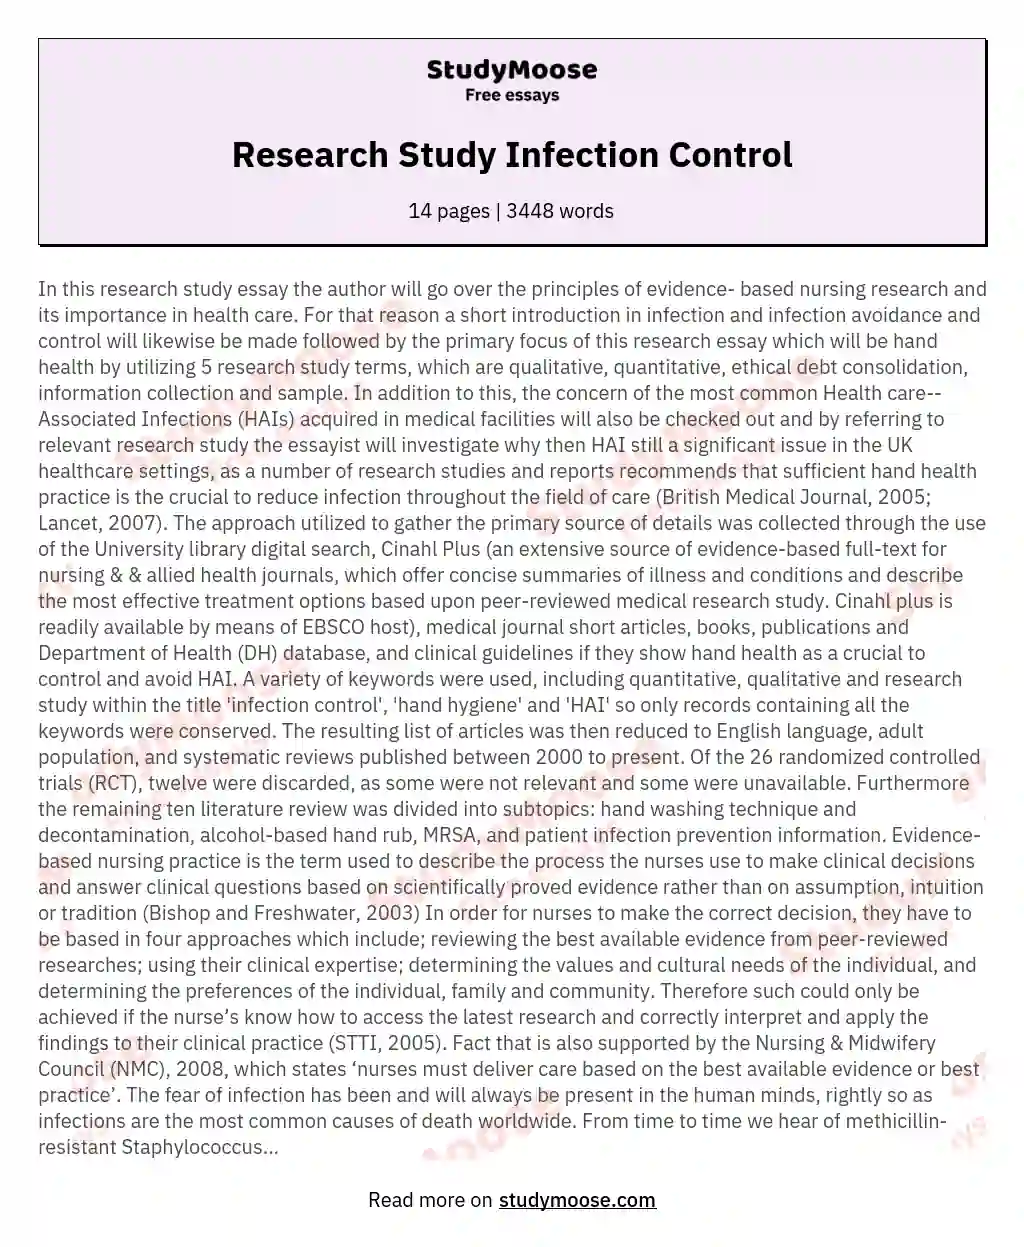 Research Study Infection Control